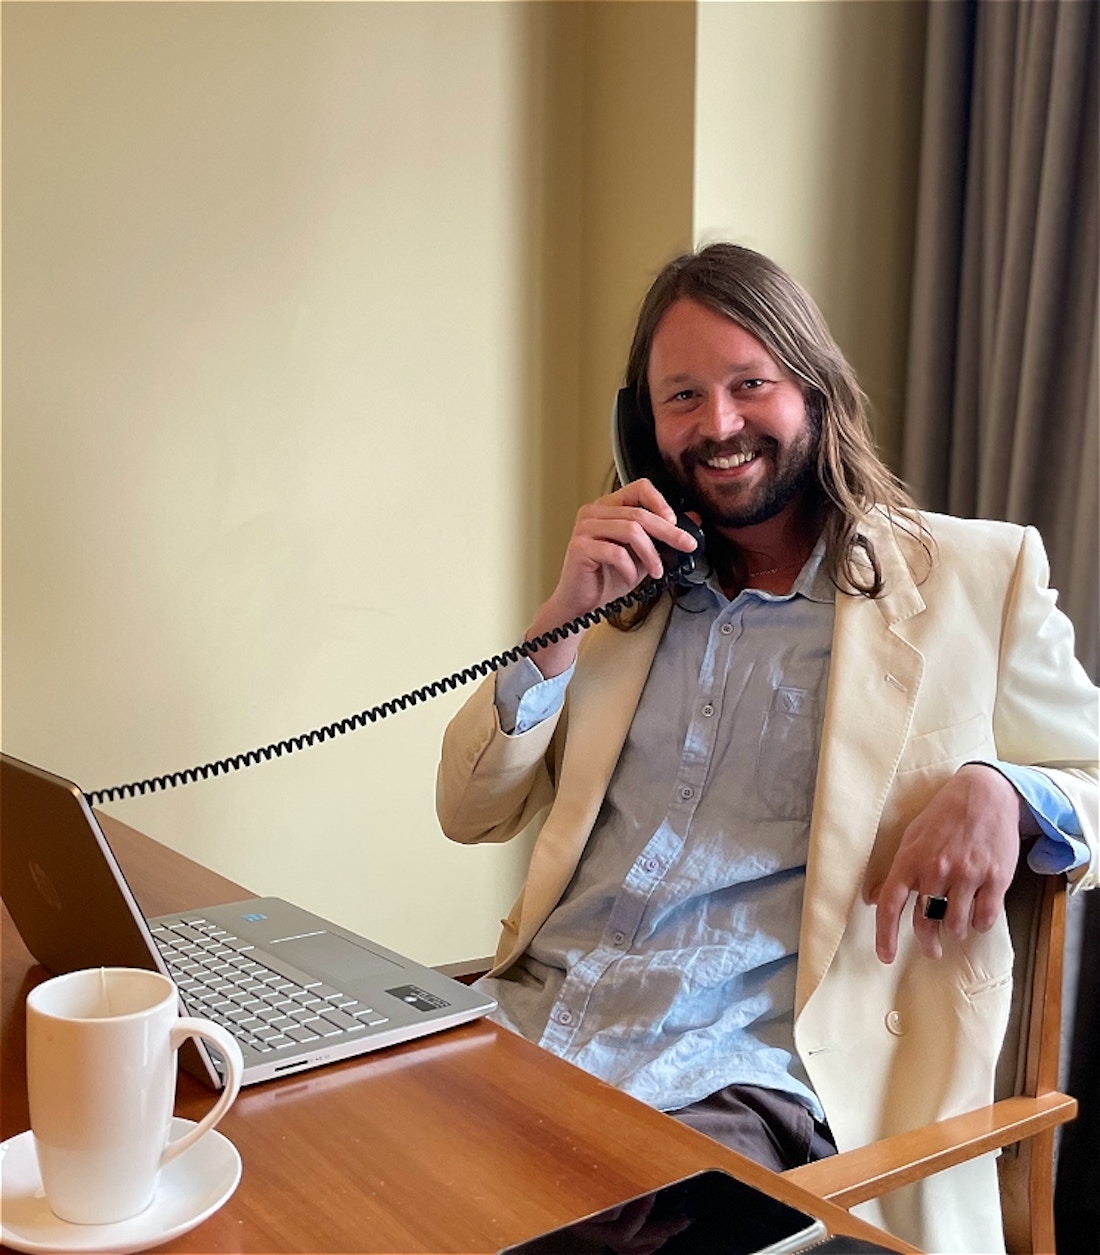 The artist dressed formally sitting at a desk holding a telephone with a laptop and coffee cup in front of him.